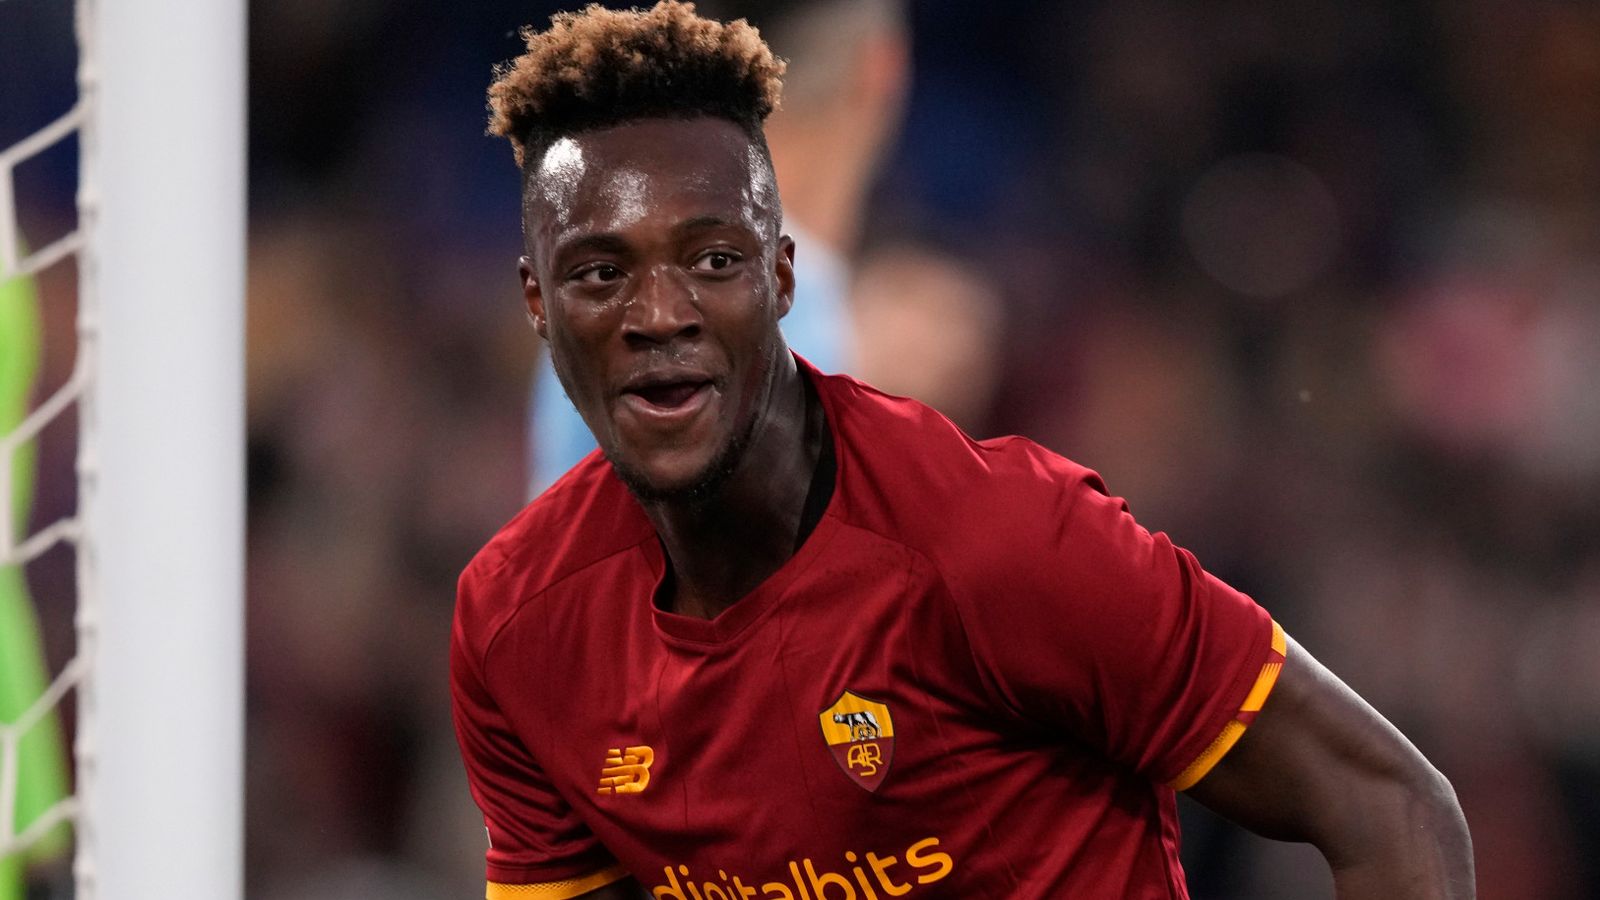 European round-up: Tammy Abraham sets scoring record for English player in Serie A season in Roma win as Betis hold Real Madrid